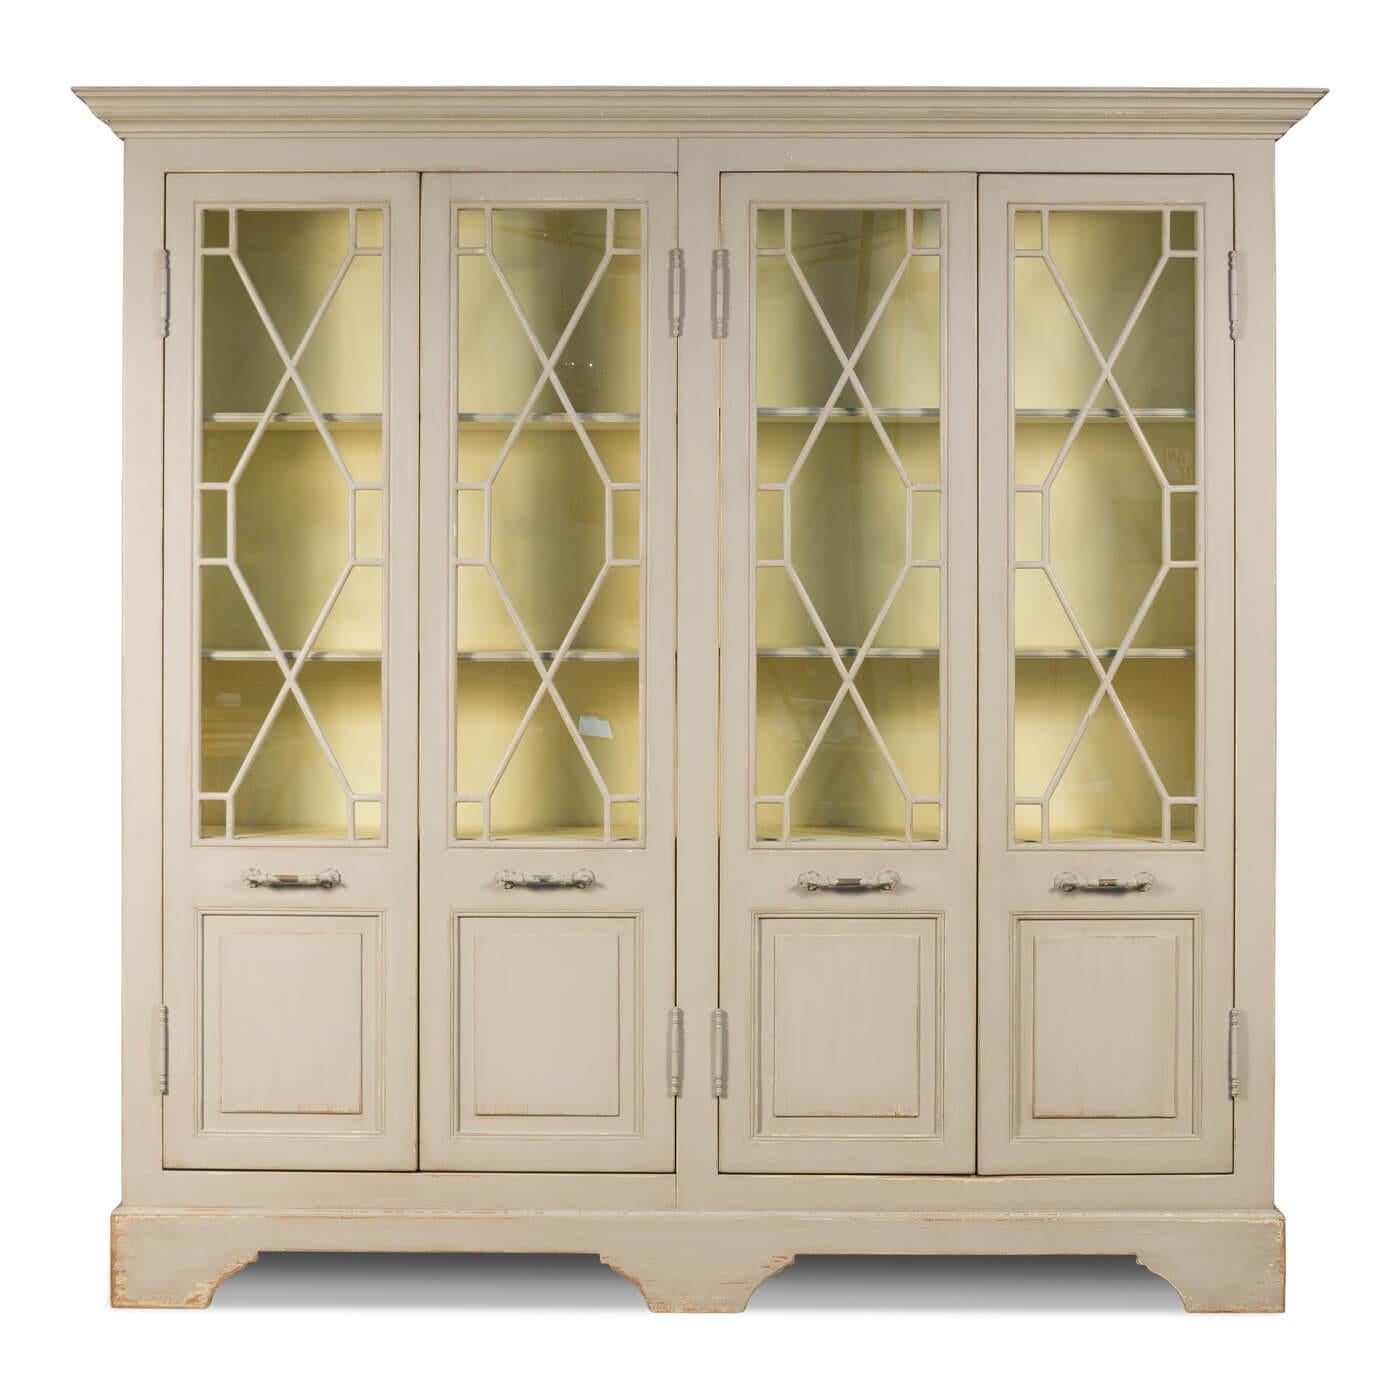 Antiqued farmhouse style painted four-door cabinet. A beautiful and functional cabinet that can be used for display and storage. The exterior is painted in soft tones, beautiful fretwork glass doors reveal the interior is painted in light butter